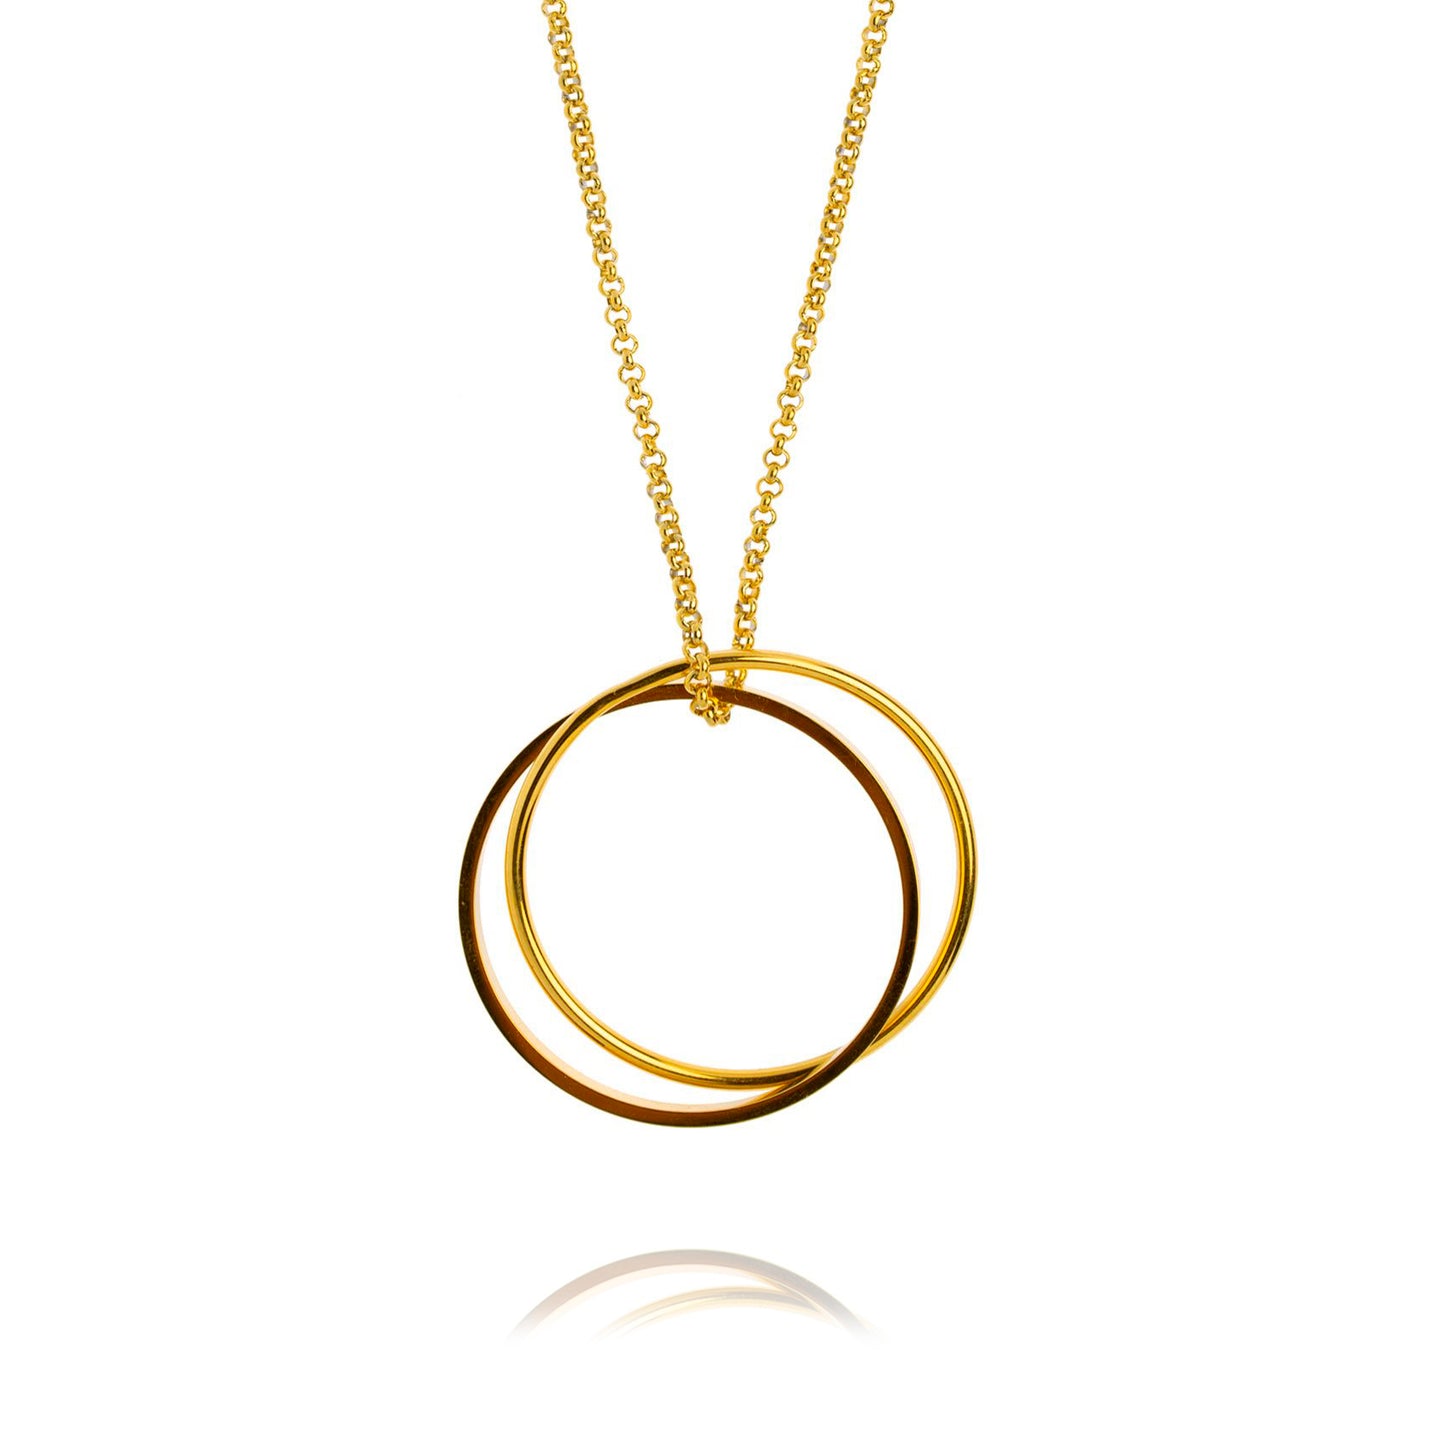 Classic circle necklace – long